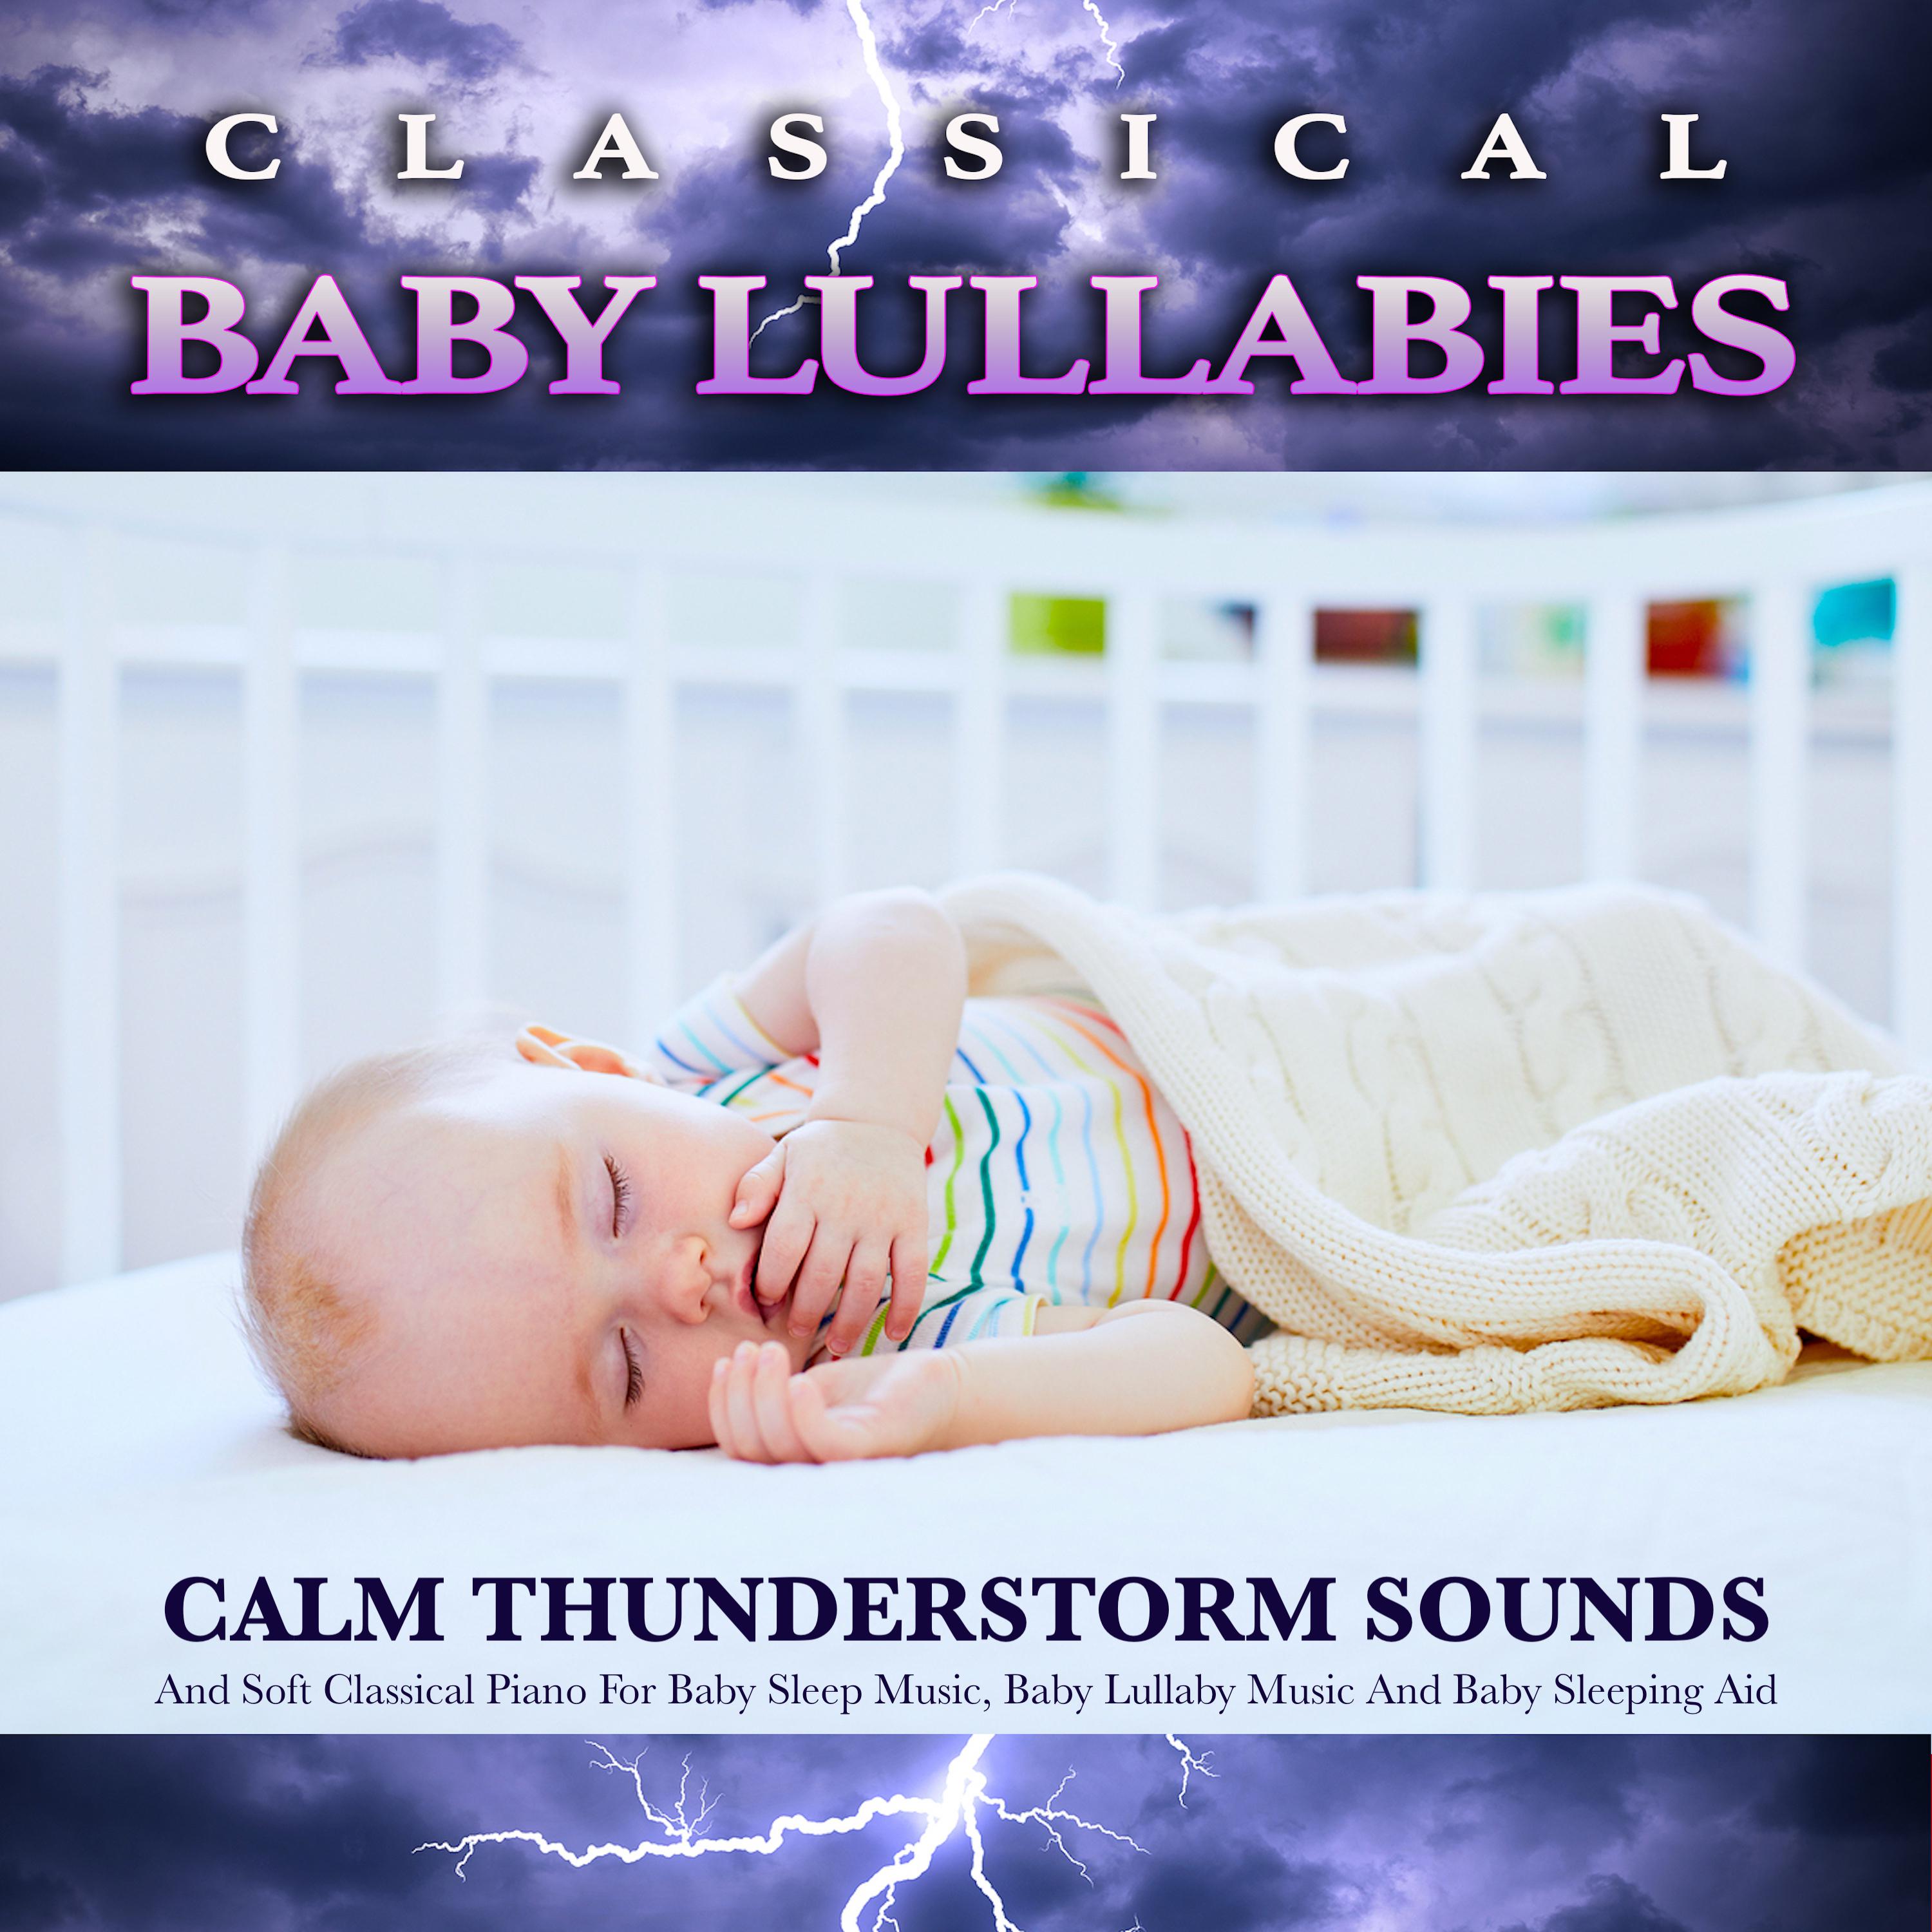 Des Abends - Schumann - Baby Lullaby - Baby Sleep Music - Classical Piano and Thunderstorm Sounds For Sleep